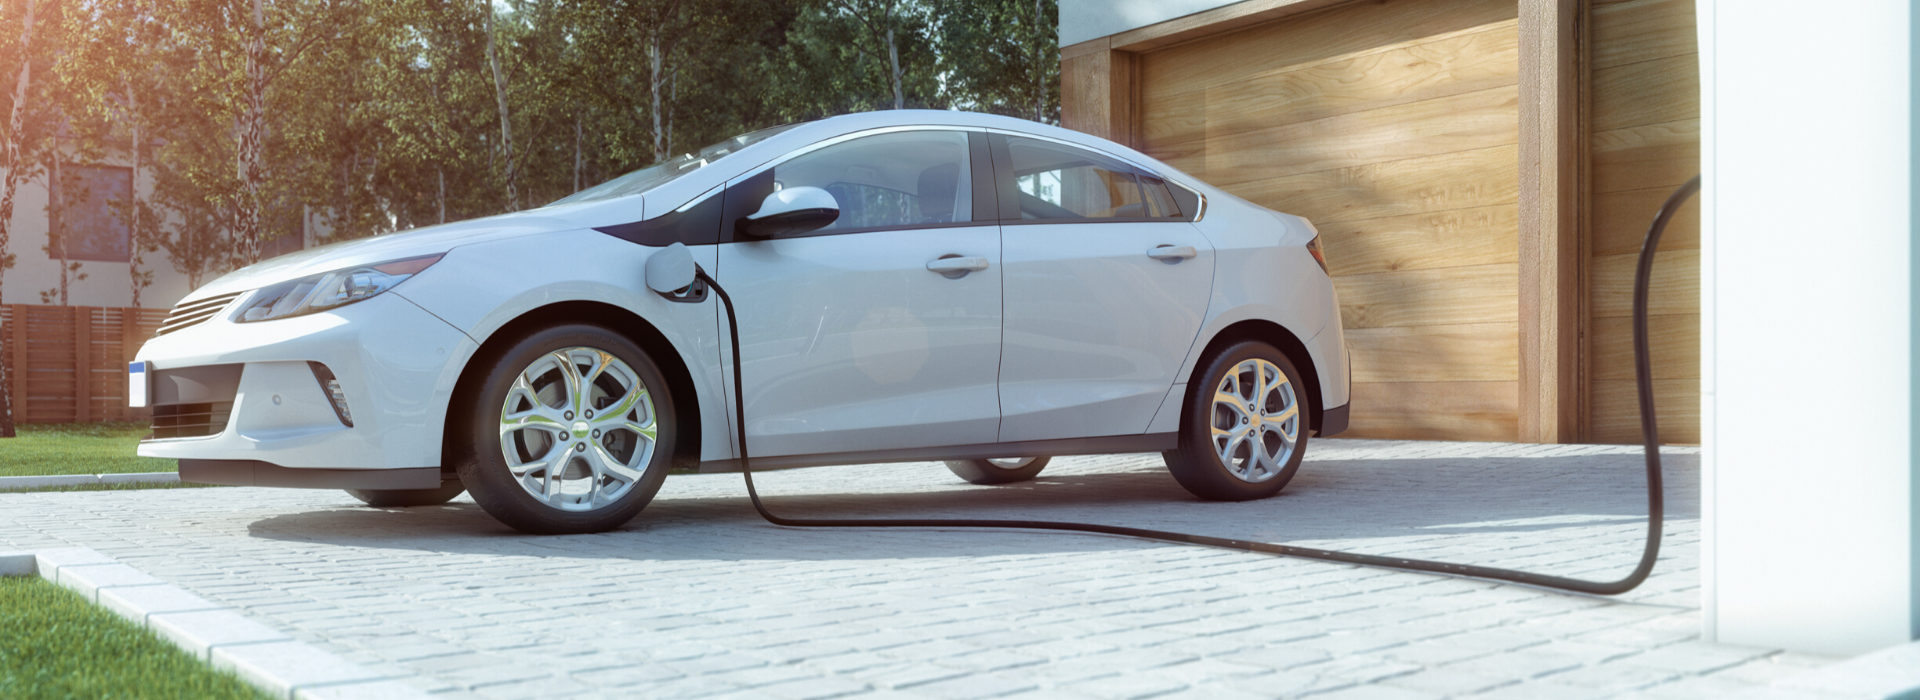 5 Reasons Why You Should Buy an Electric Vehicle in 2020 TriState